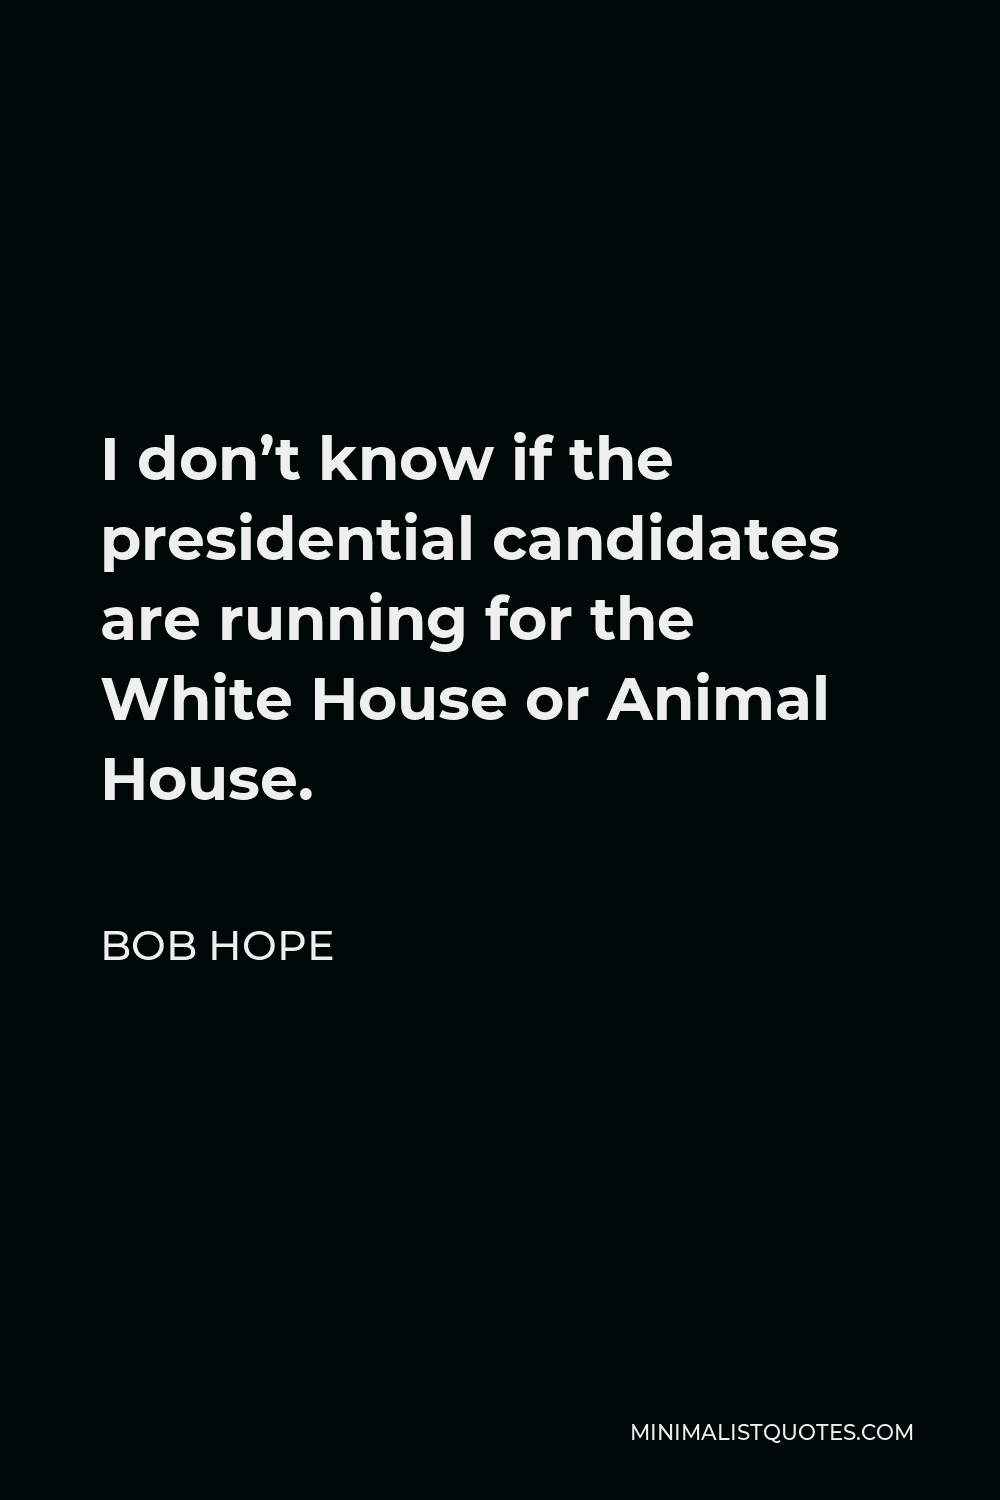 Bob Hope Quote - I don’t know if the presidential candidates are running for the White House or Animal House.